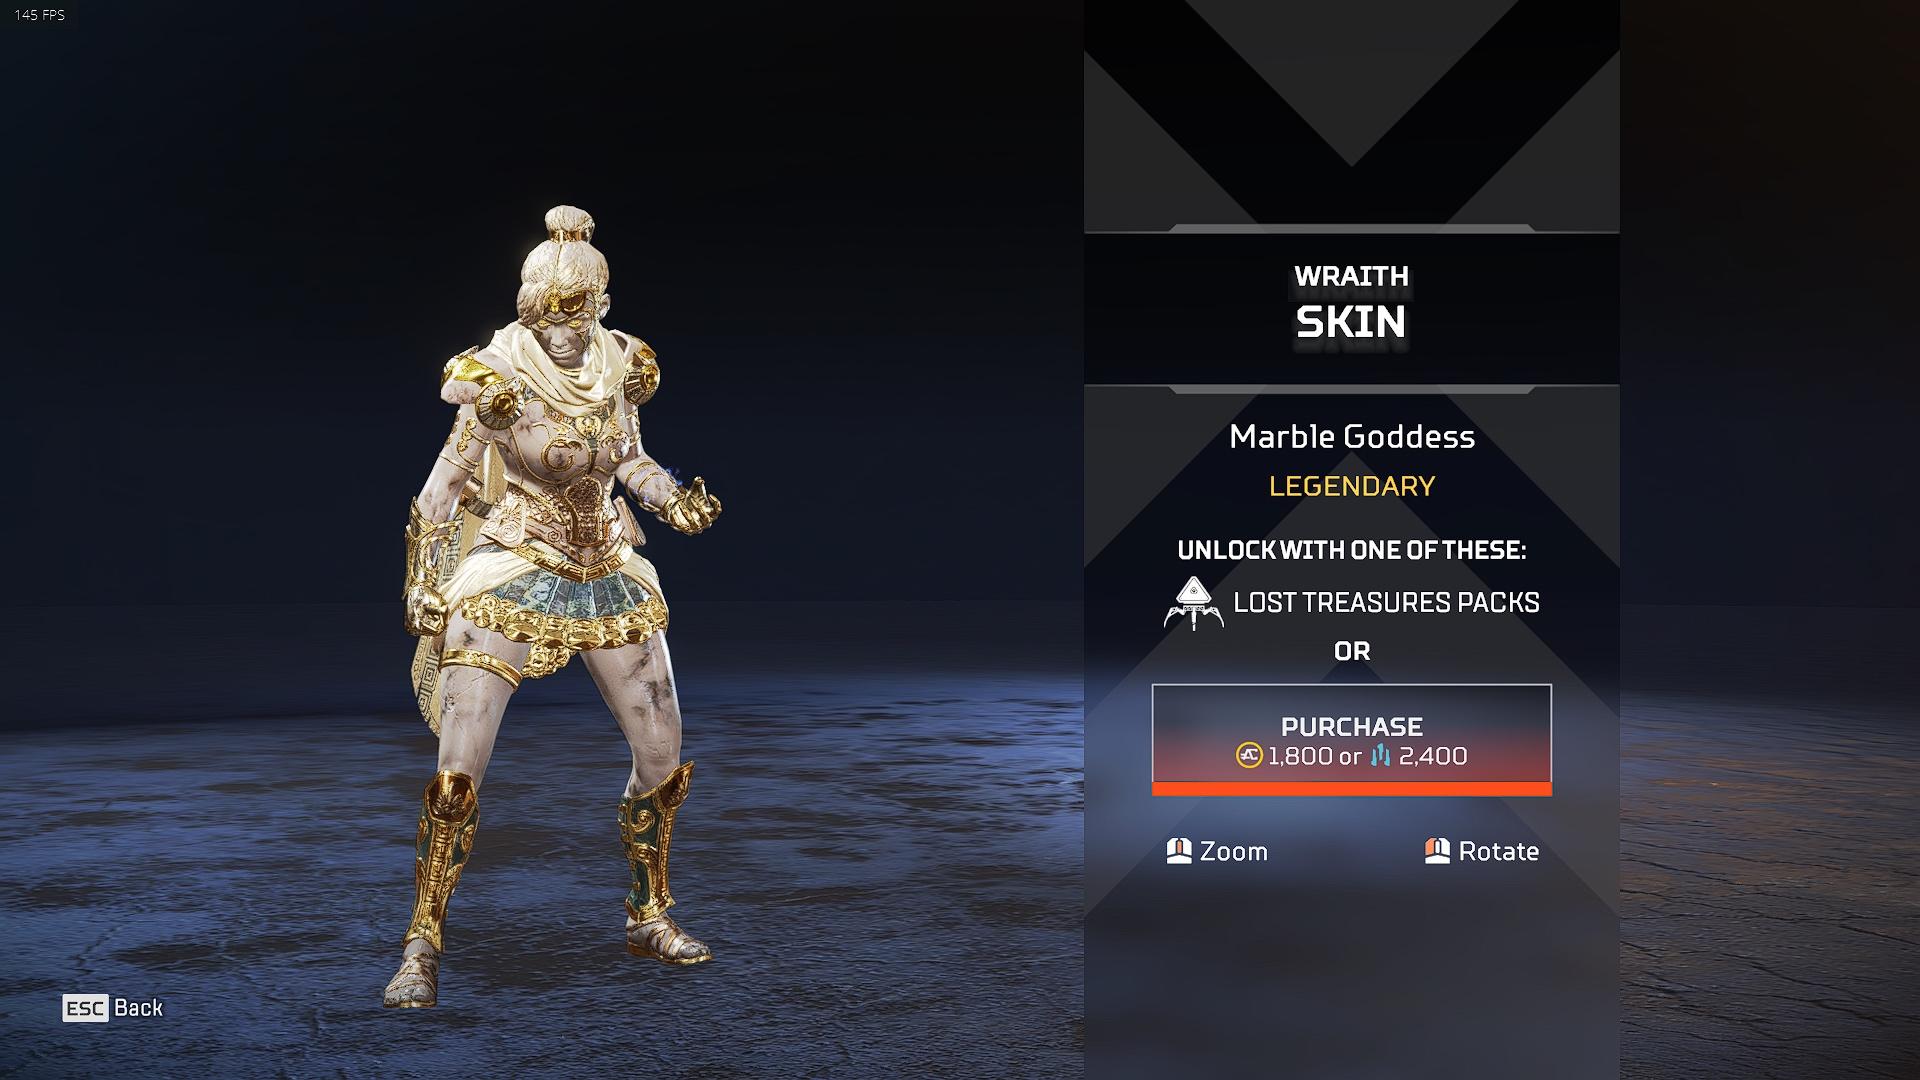 Wraith marble goddess skin in Apex Legends Lost Treasures event